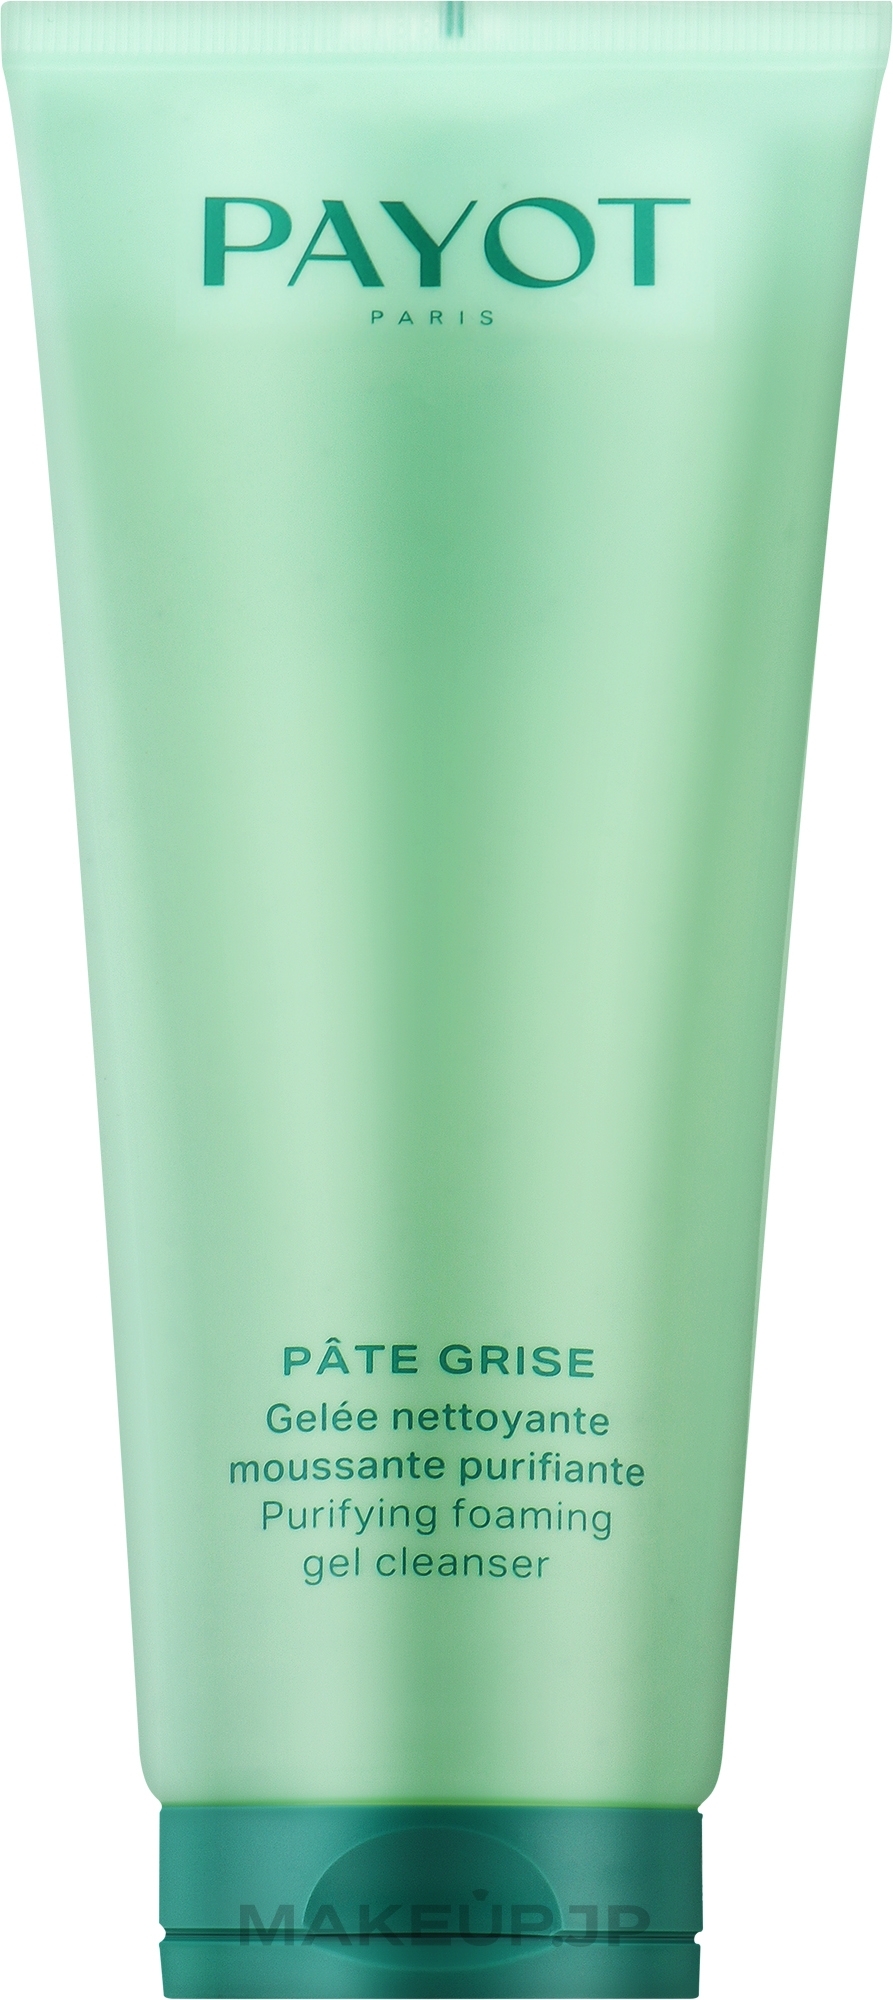 Foaming Gel Cleanser - Payot Pate Grise Gelee Nettoyante — photo 200 ml